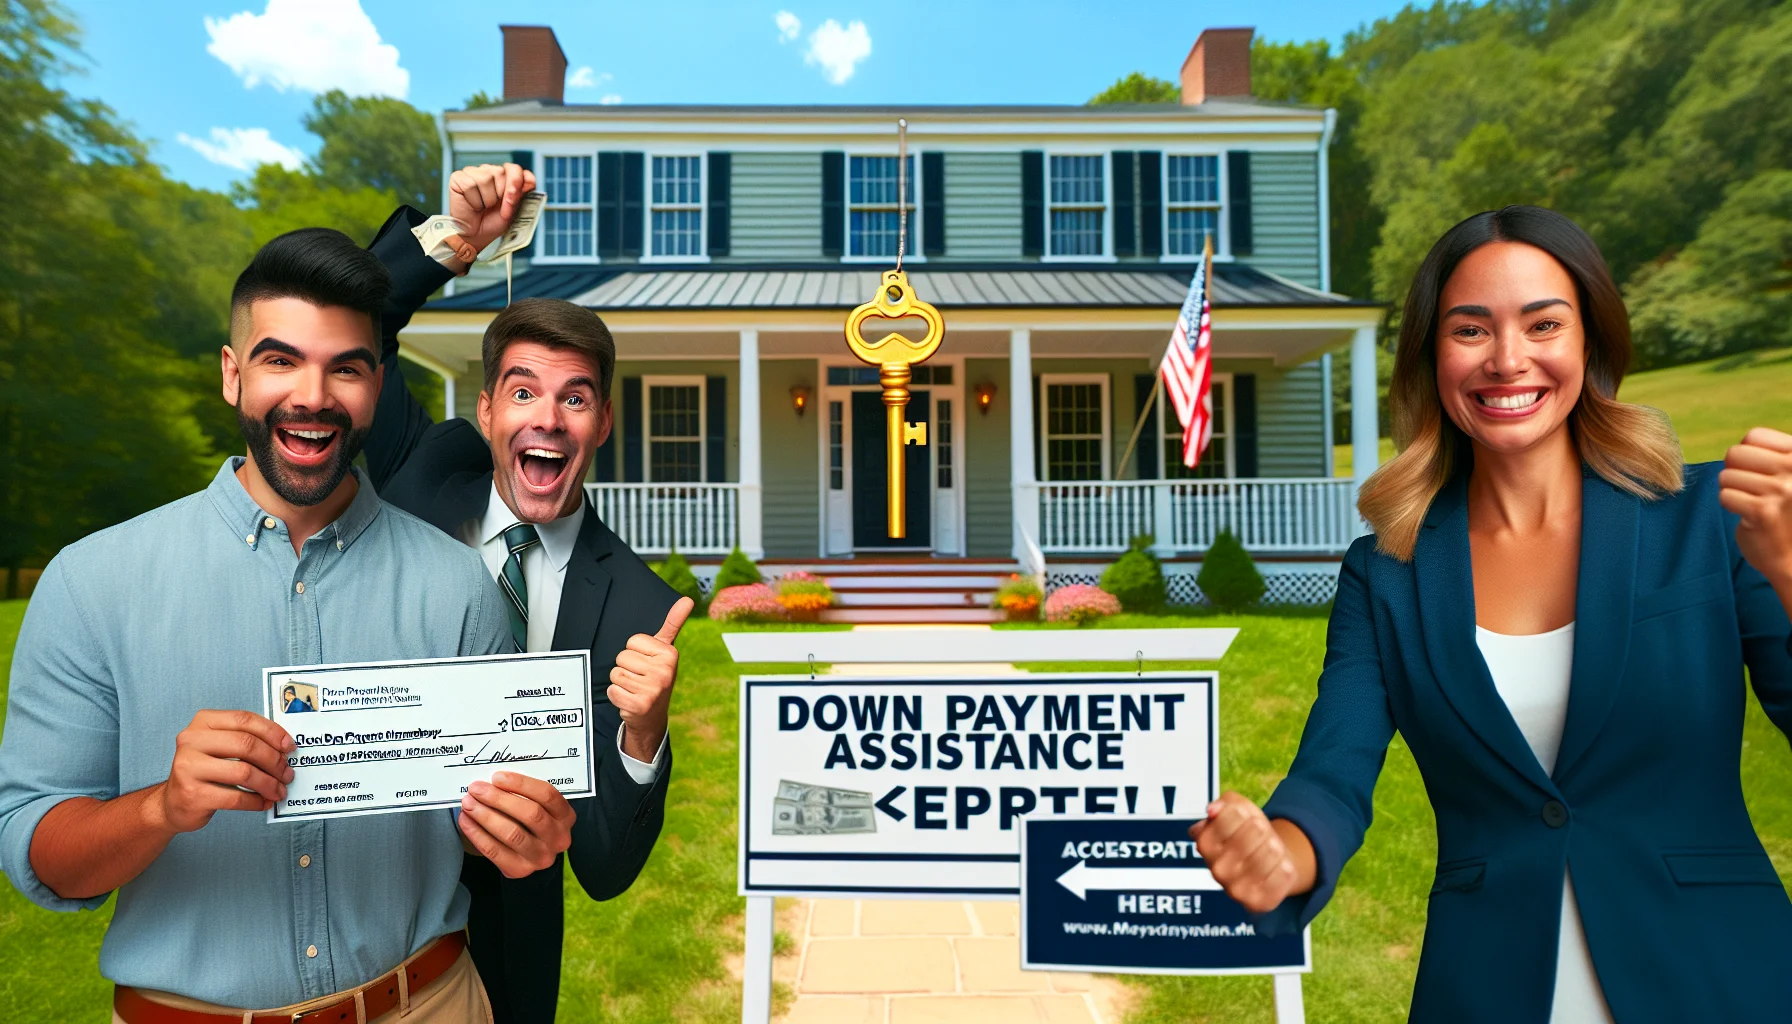 Picture a perfect scenario for a down payment assistance program in Maryland. An ecstatic first-time Hispanic homebuyer, holding the symbolic golden key, stands in front of a beautifully restored colonial-style house. Nearby, a Caucasian real estate agent hands over a large check, symbolizing the assistance from the program. A sign reads 'Down Payment Assistance Accepted Here!' stands in the lush green yard, and a blue Maryland state flag flutters in the breeze. The scene captures the essence of joy, relief and accomplishment arising from this successful interaction between seller, buyer, and the assistance program.